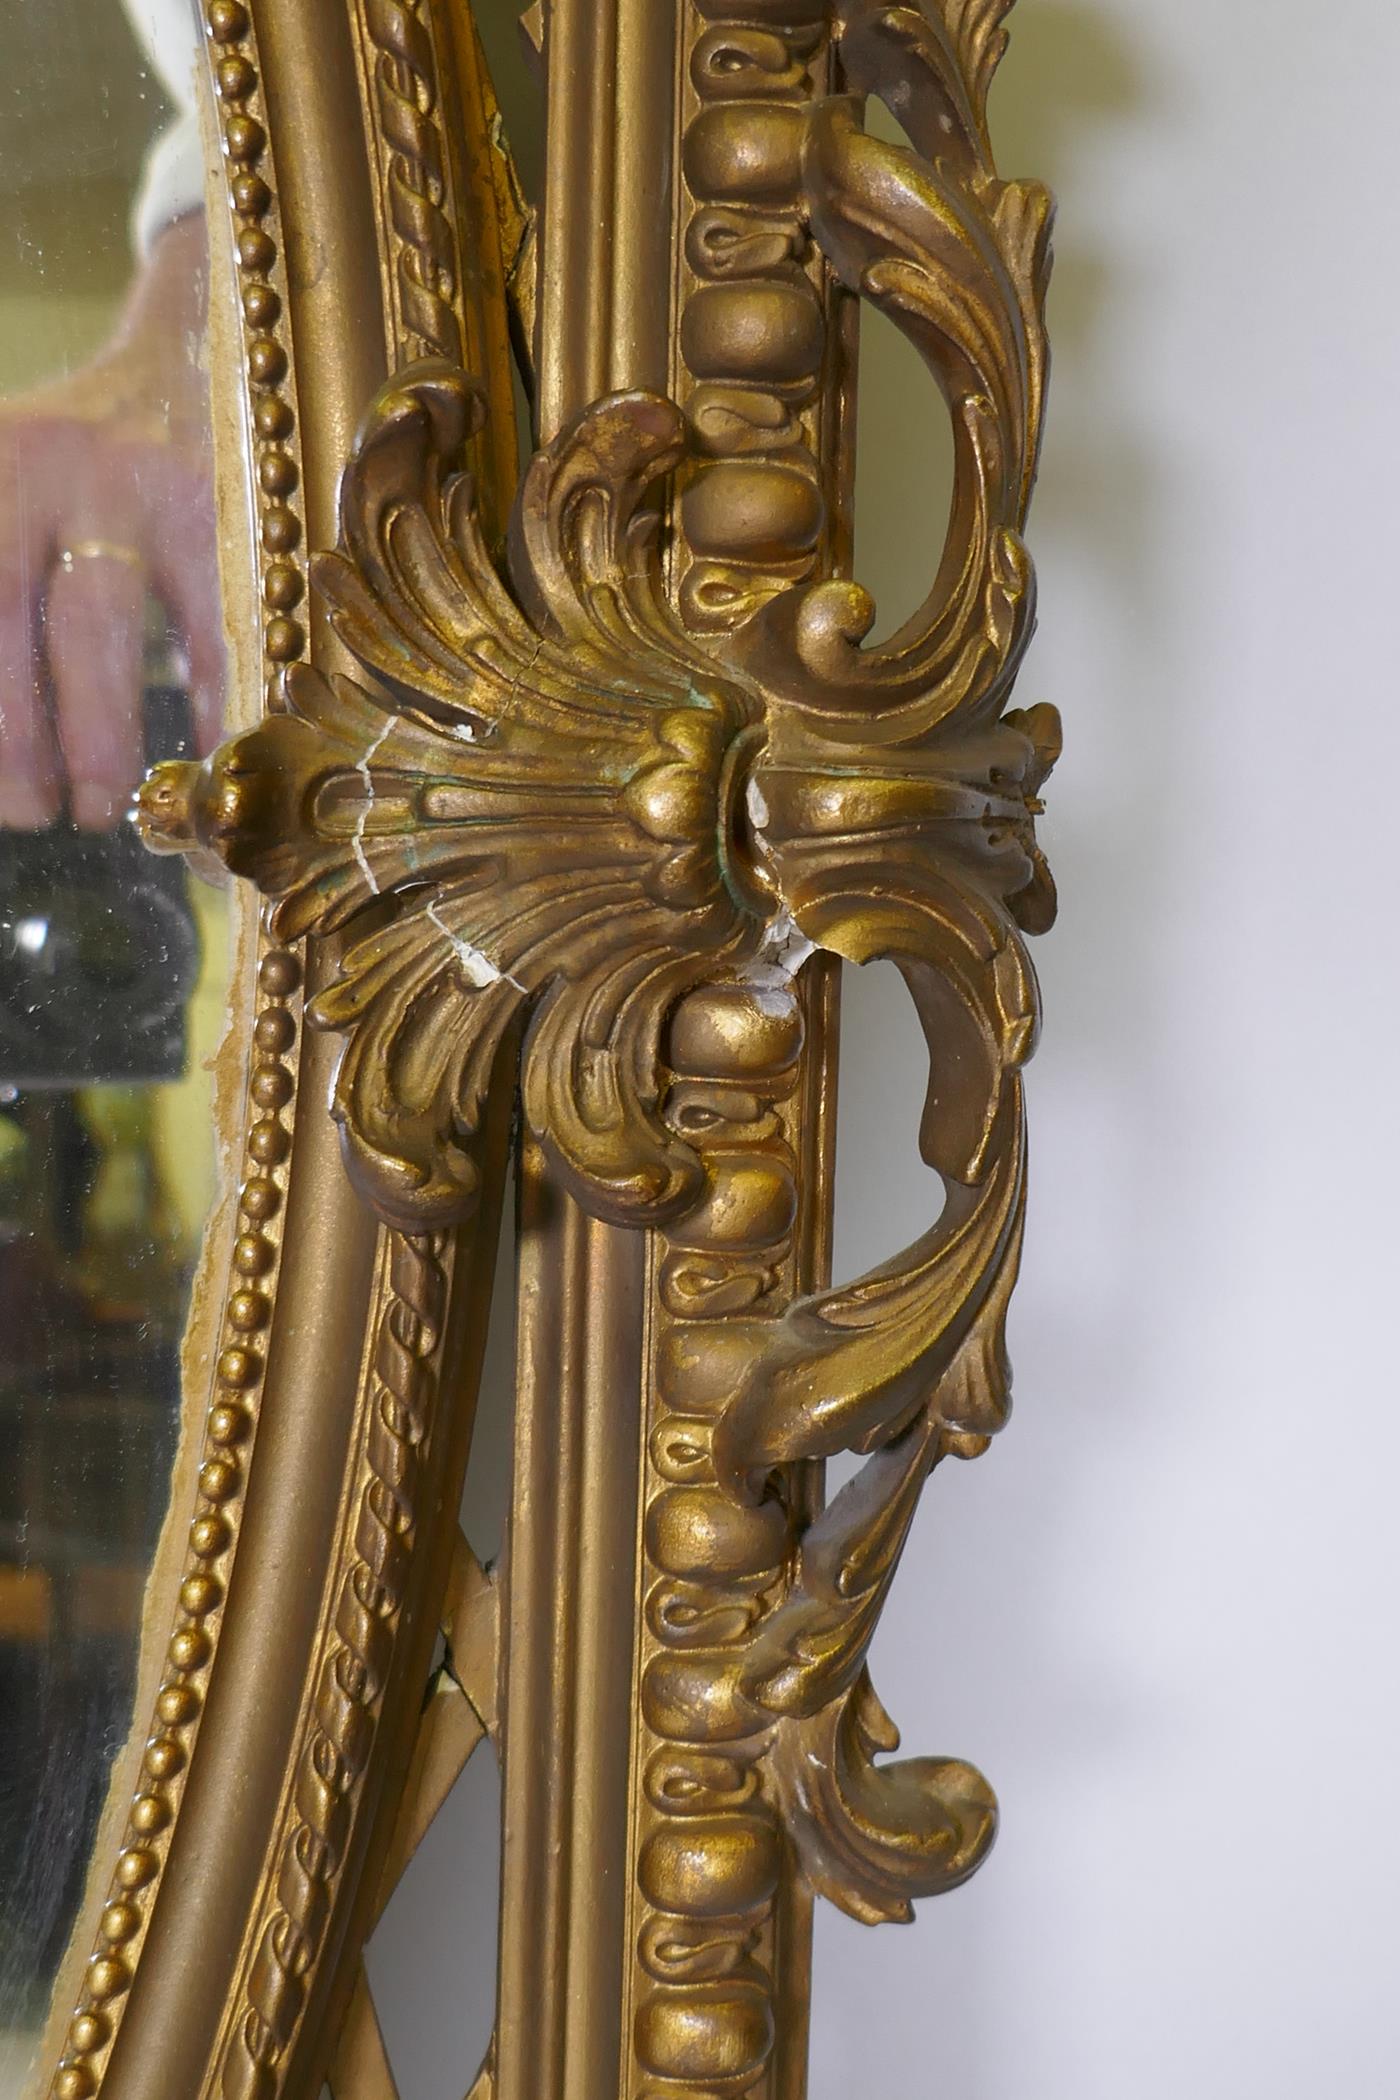 A C19th Continental giltwood and plaster wall mirror, with bevelled glass and pierced spandrels, - Image 3 of 4